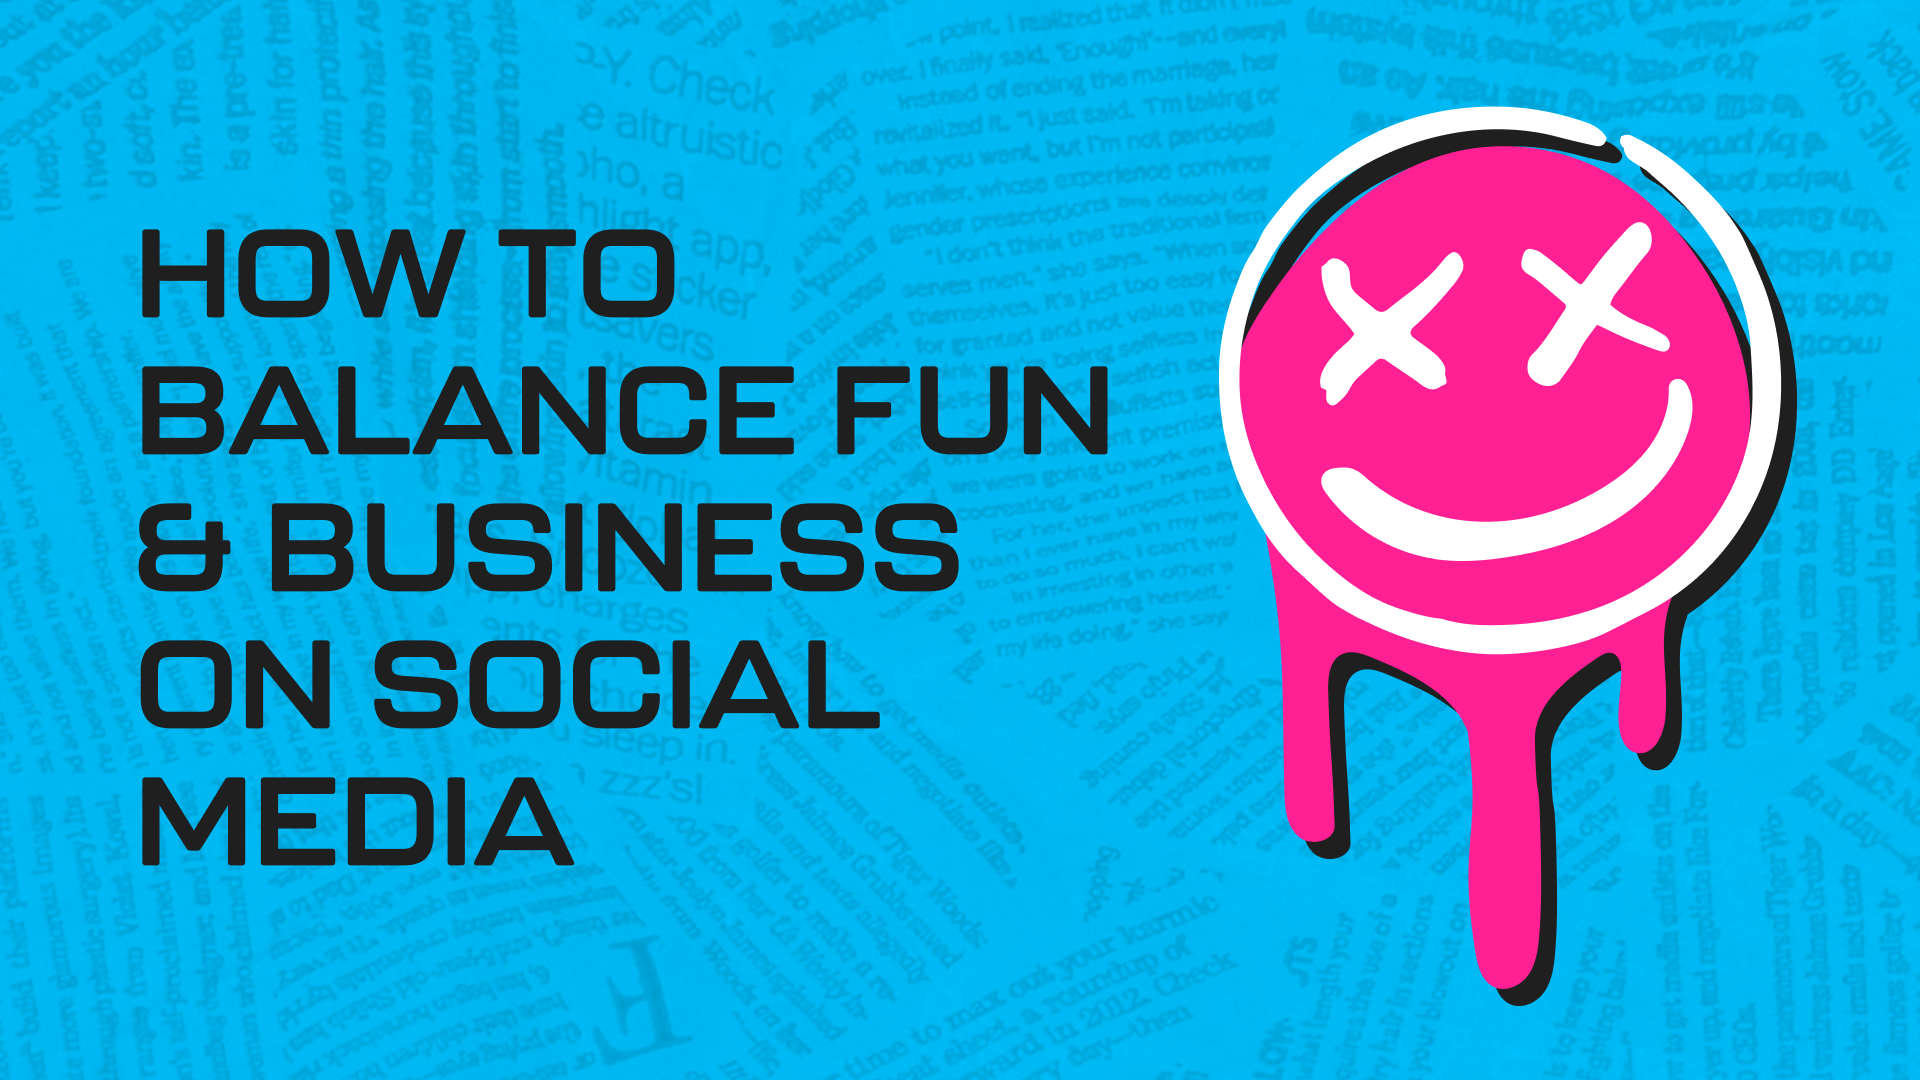 How To Balance Fun And Business On Social Media